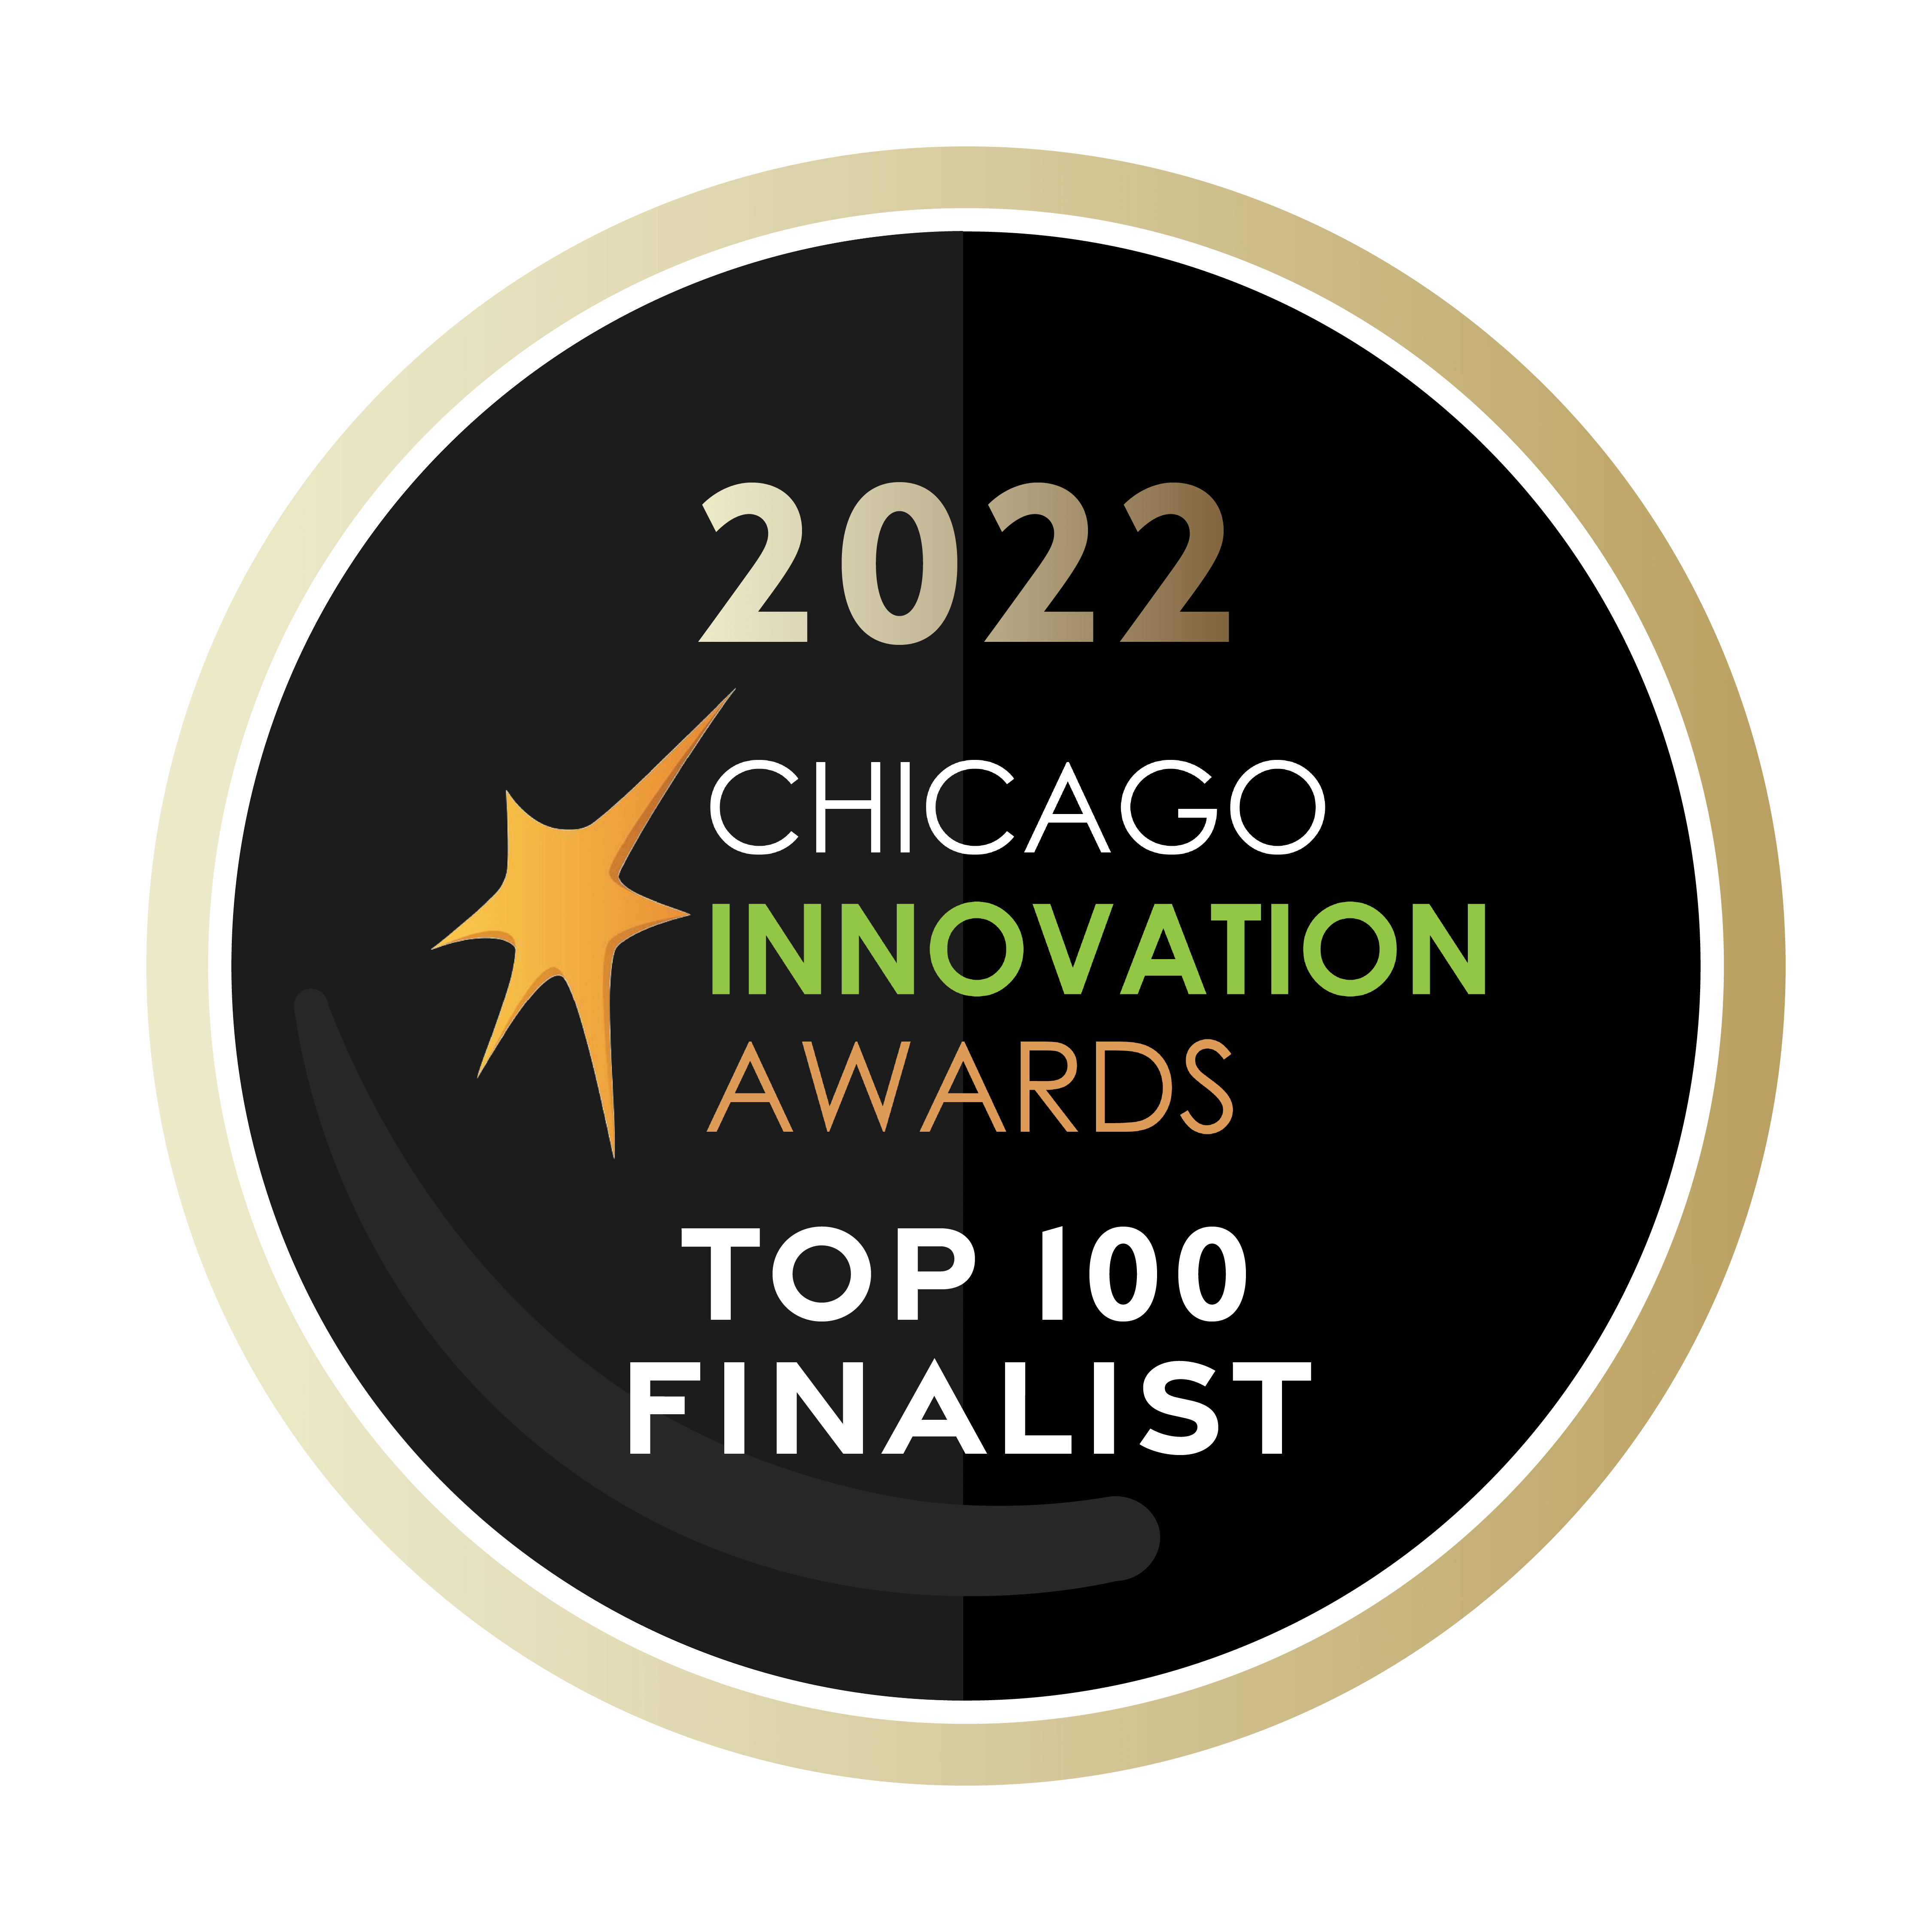 Chicago Innovation Awards Top 100 Finalist 2022 Image